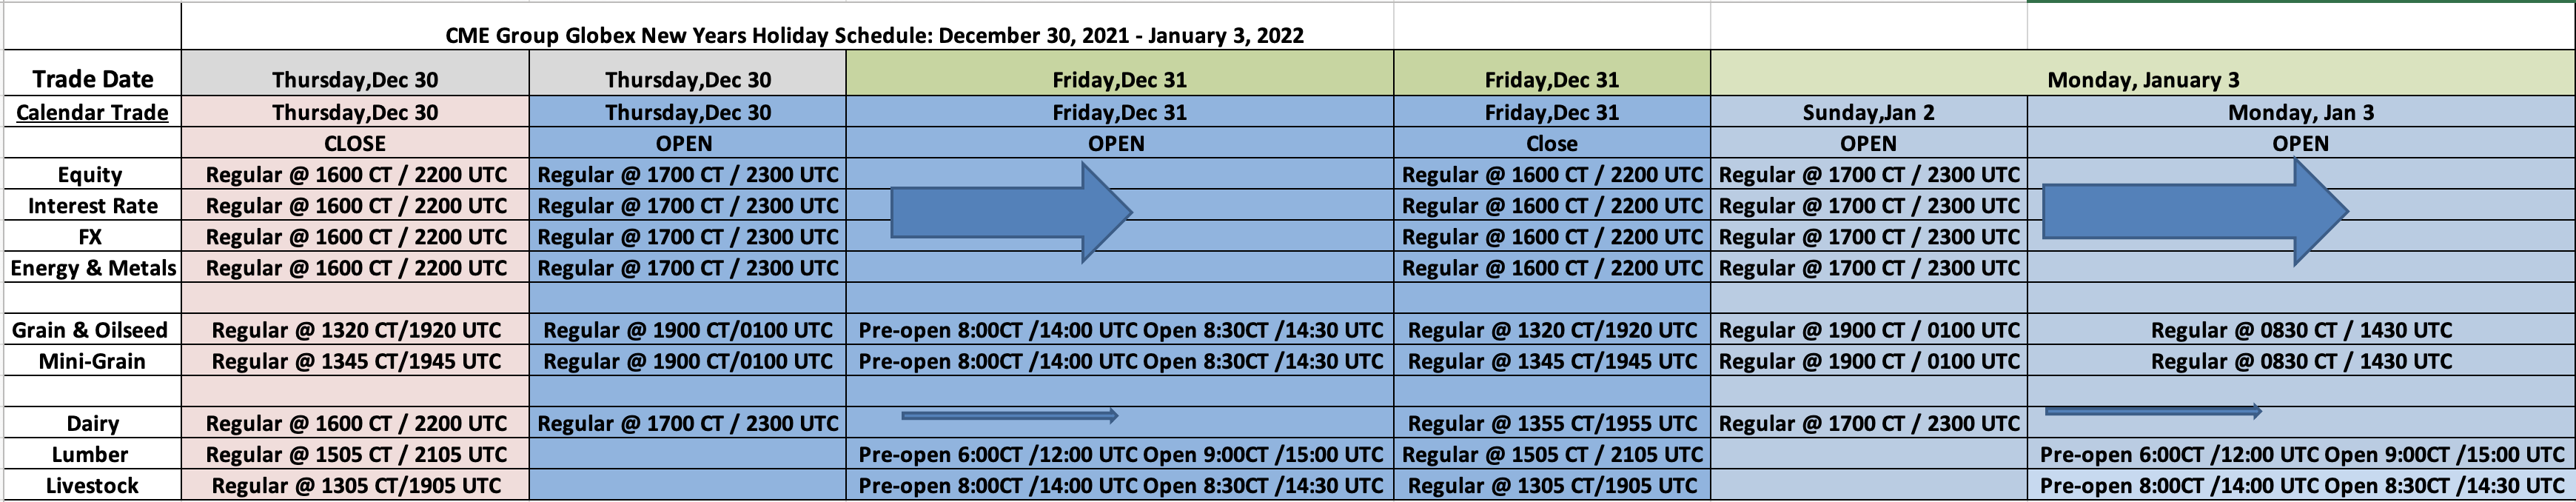 Cme Holiday Calendar 2022 New Years Holiday Trading Schedule - 2021